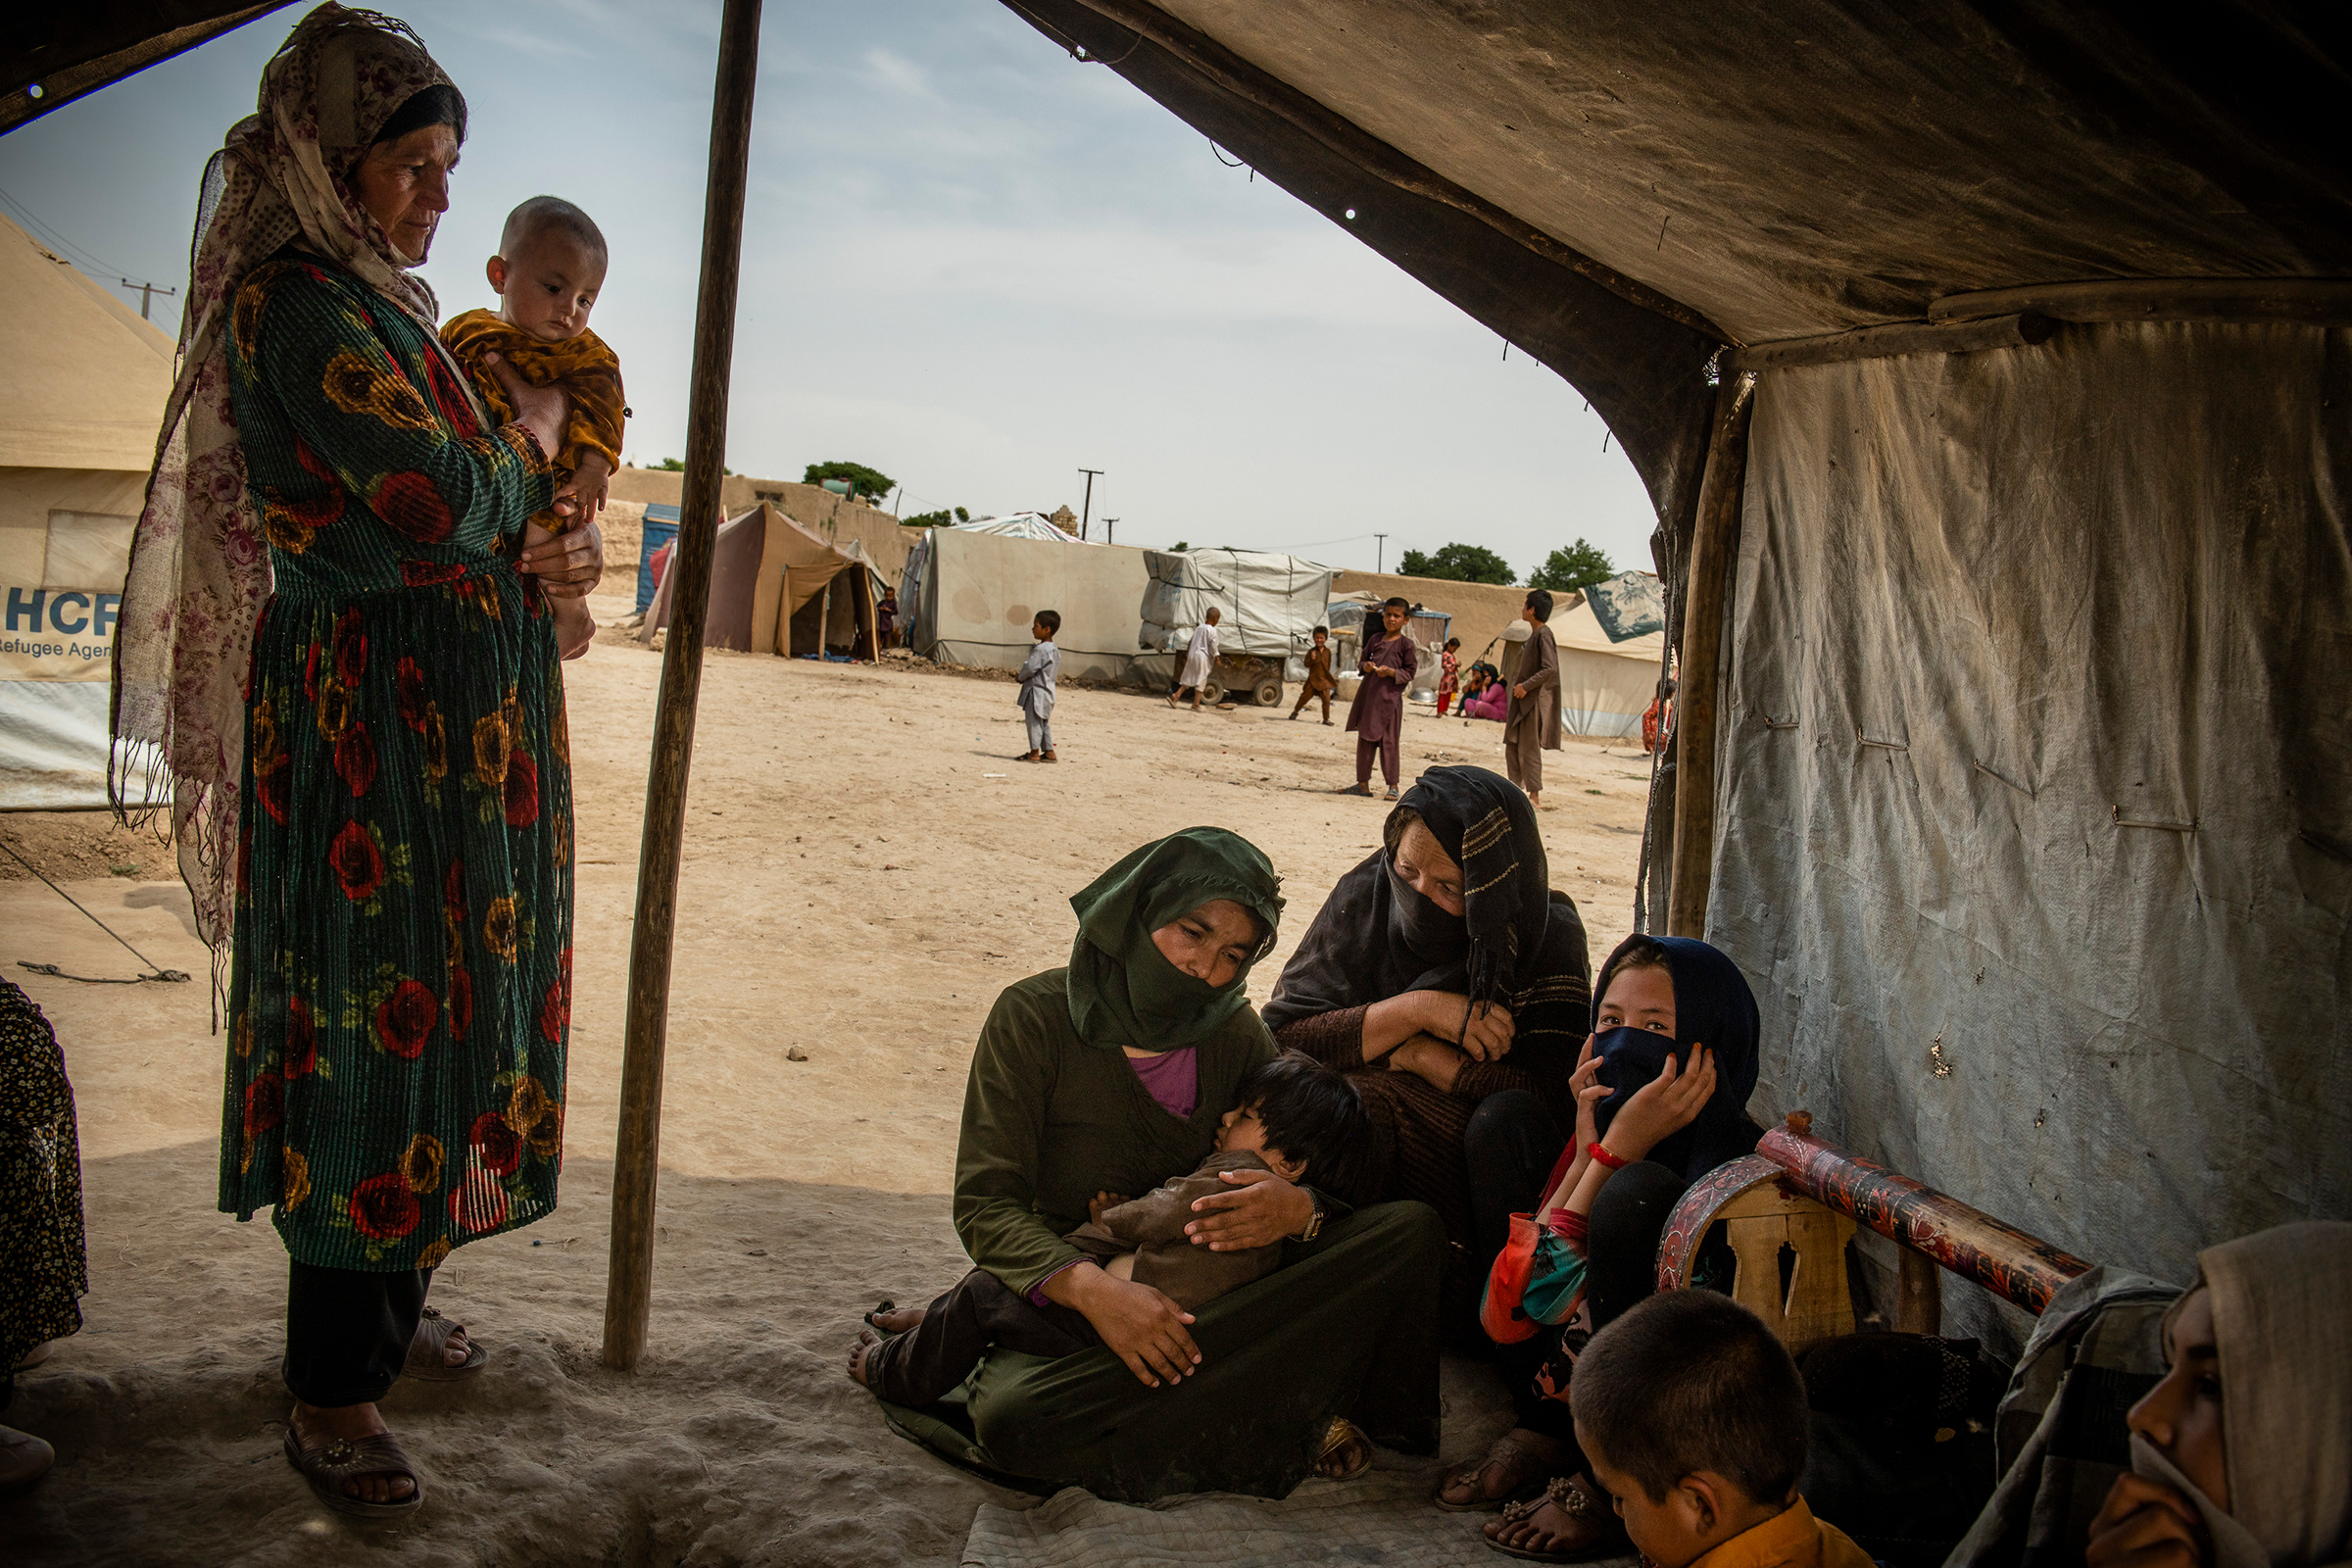 Kowsar 13, and her sister, Madina, 15, in a tent for internally displaced people in Afghanistan's northern Jowzjan Province on May 3, 2021. They have not been able to continue their education because the Taliban took over their home and banned girls like her from going to school.